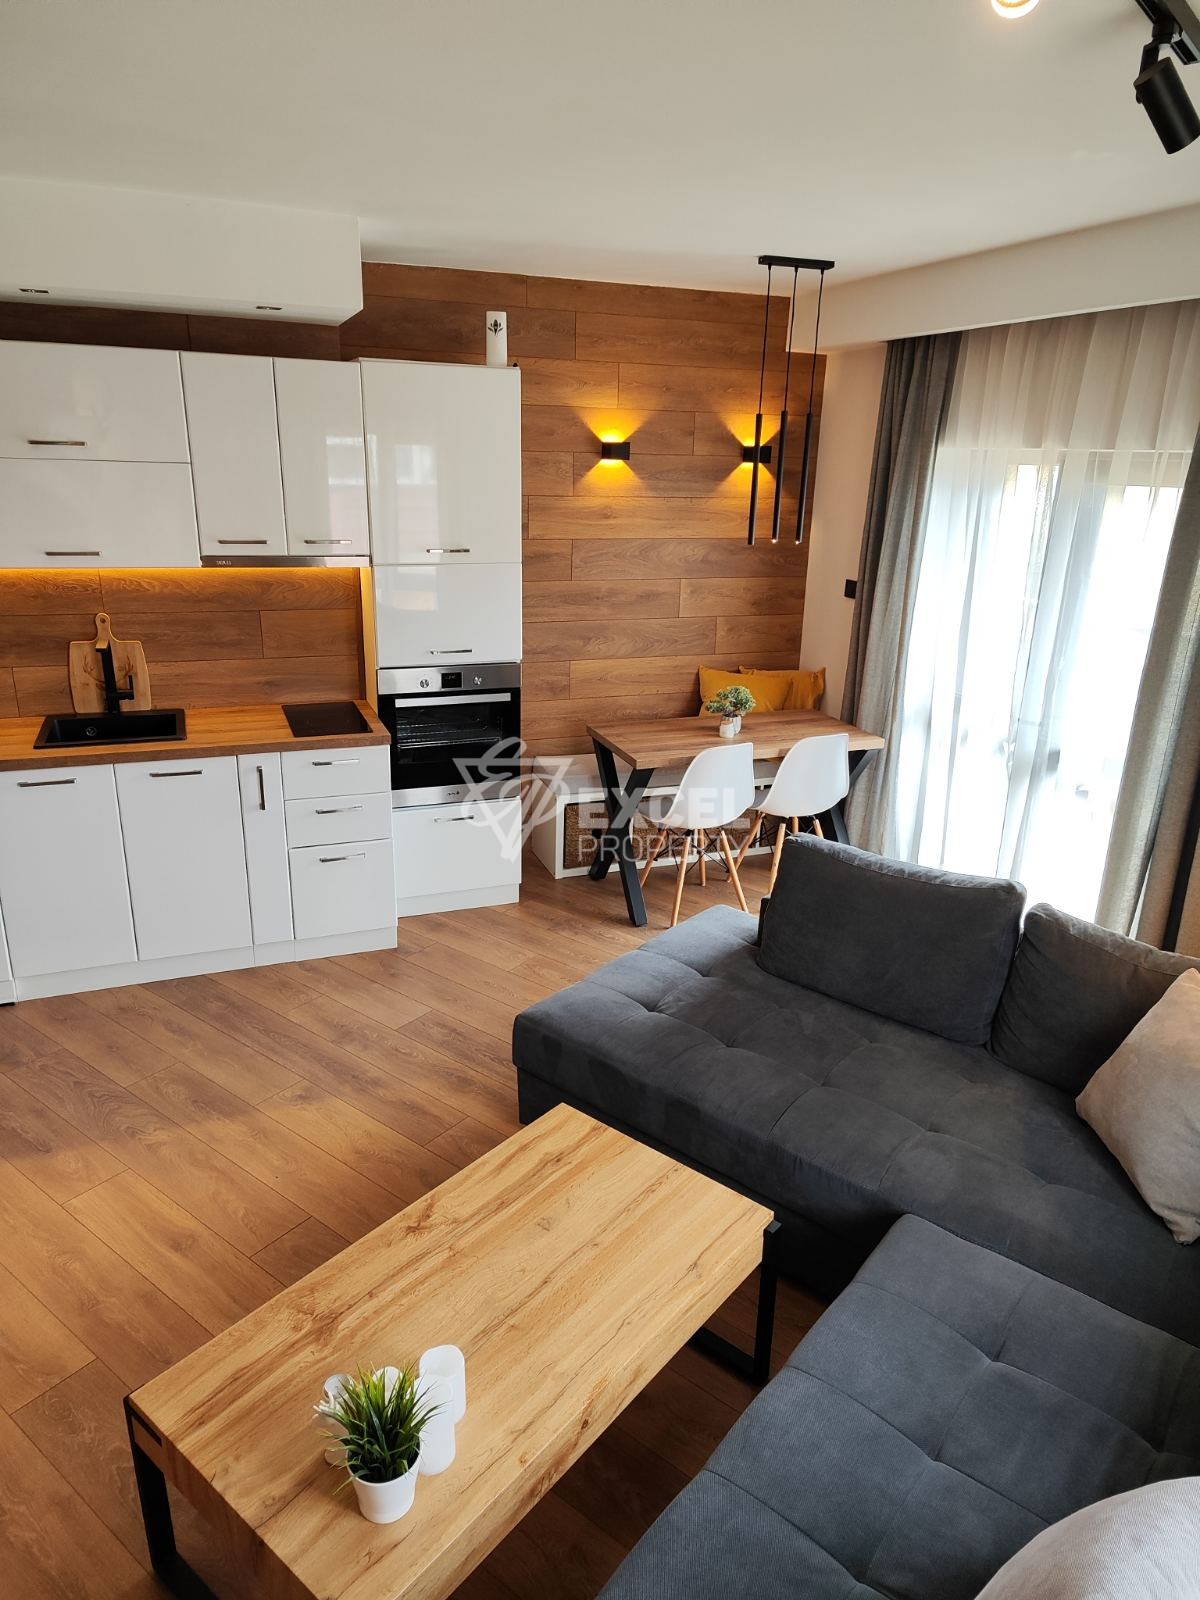 Elegantly furnished two-bedroom apartment with a low maintenance fee